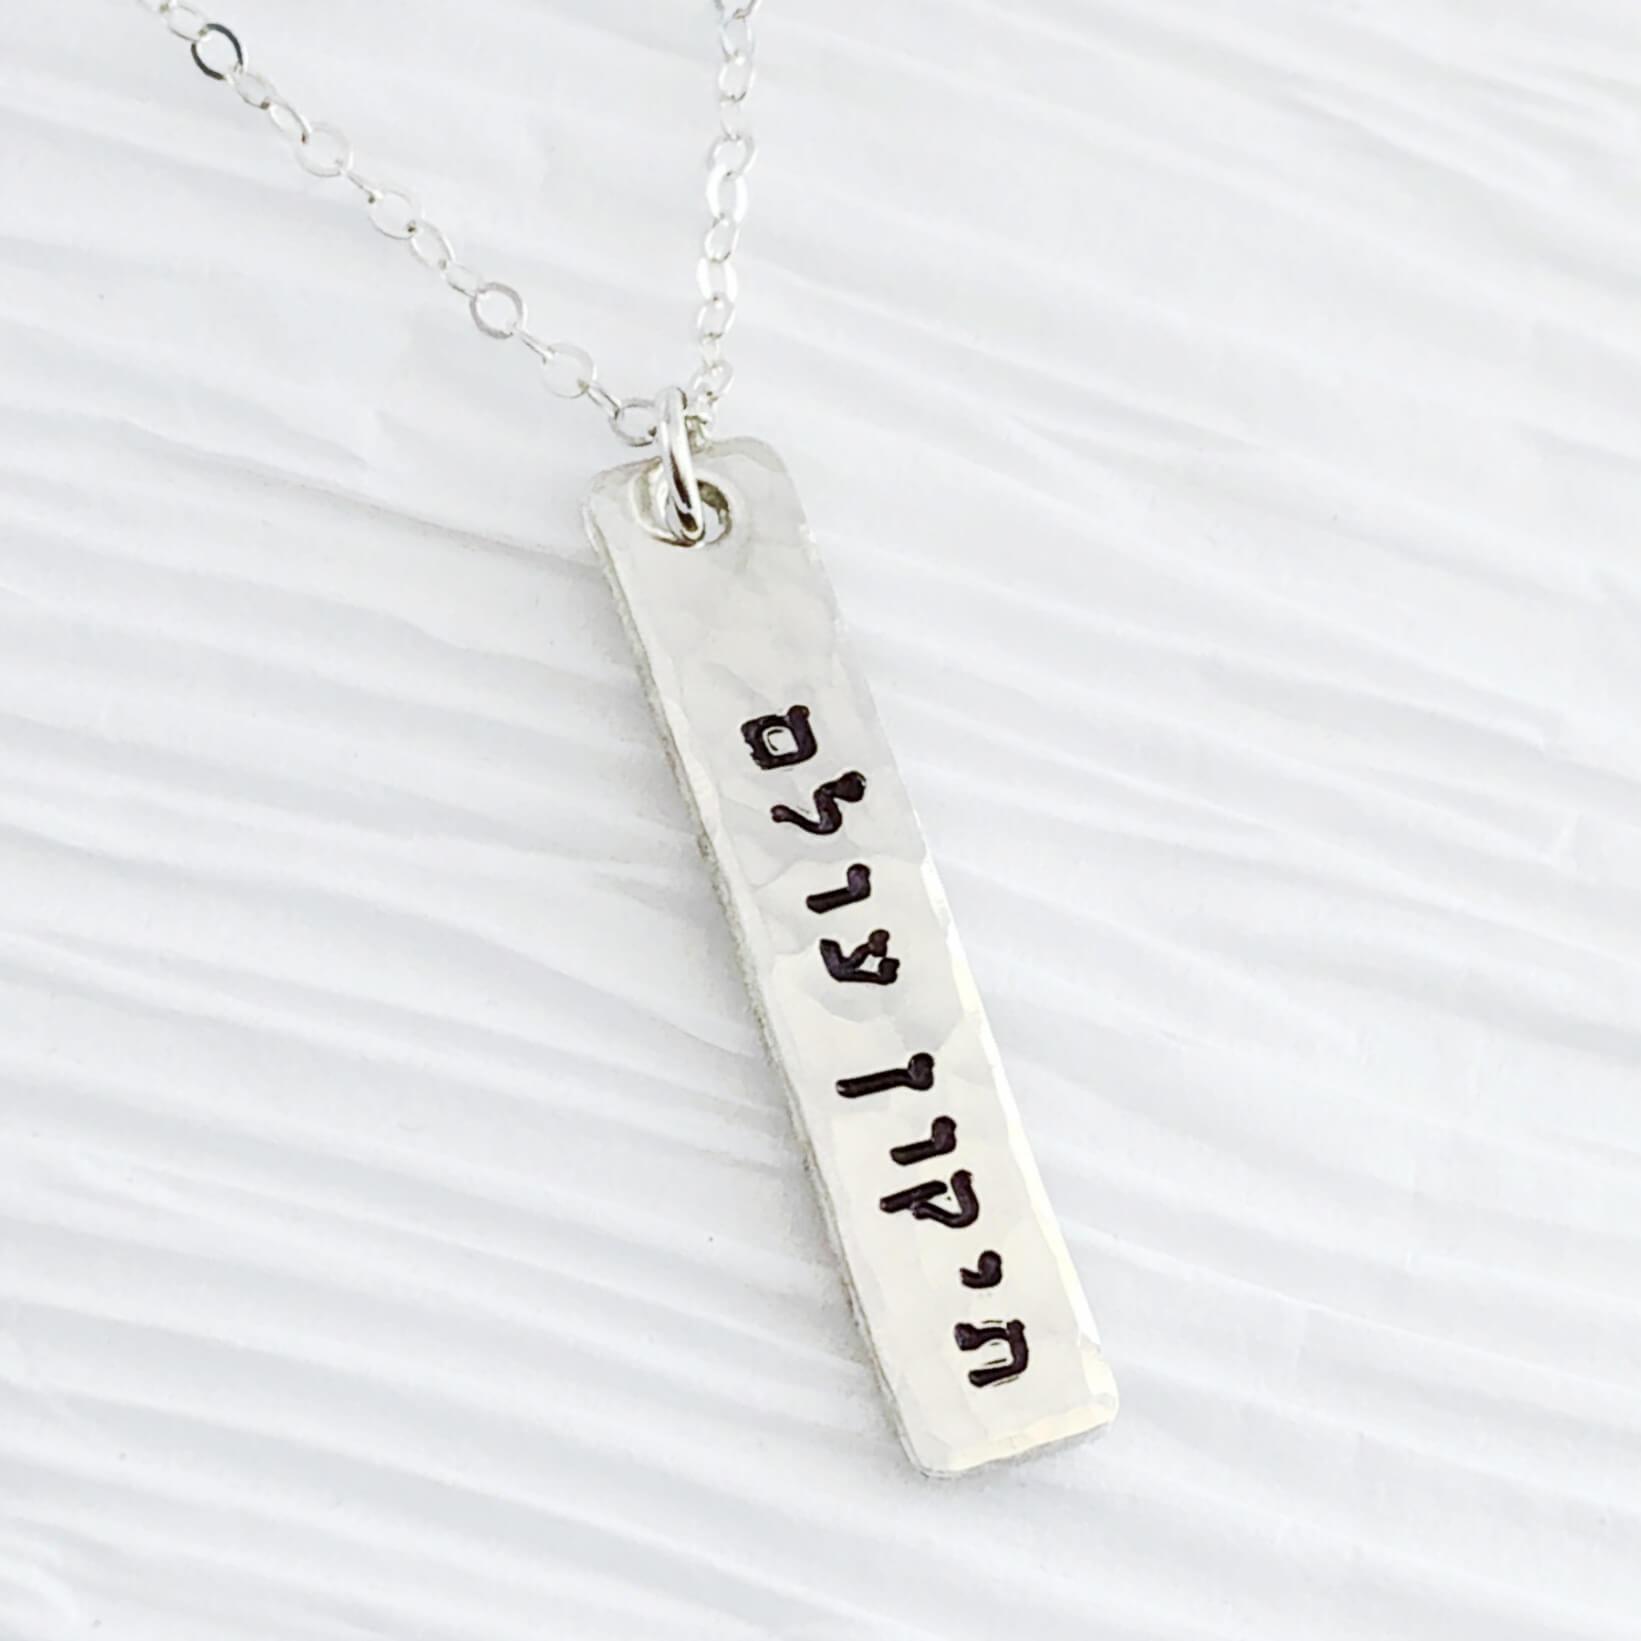 Everything Beautiful Necklaces Silver Tikkun Olam Bar Necklace - Sterling Silver